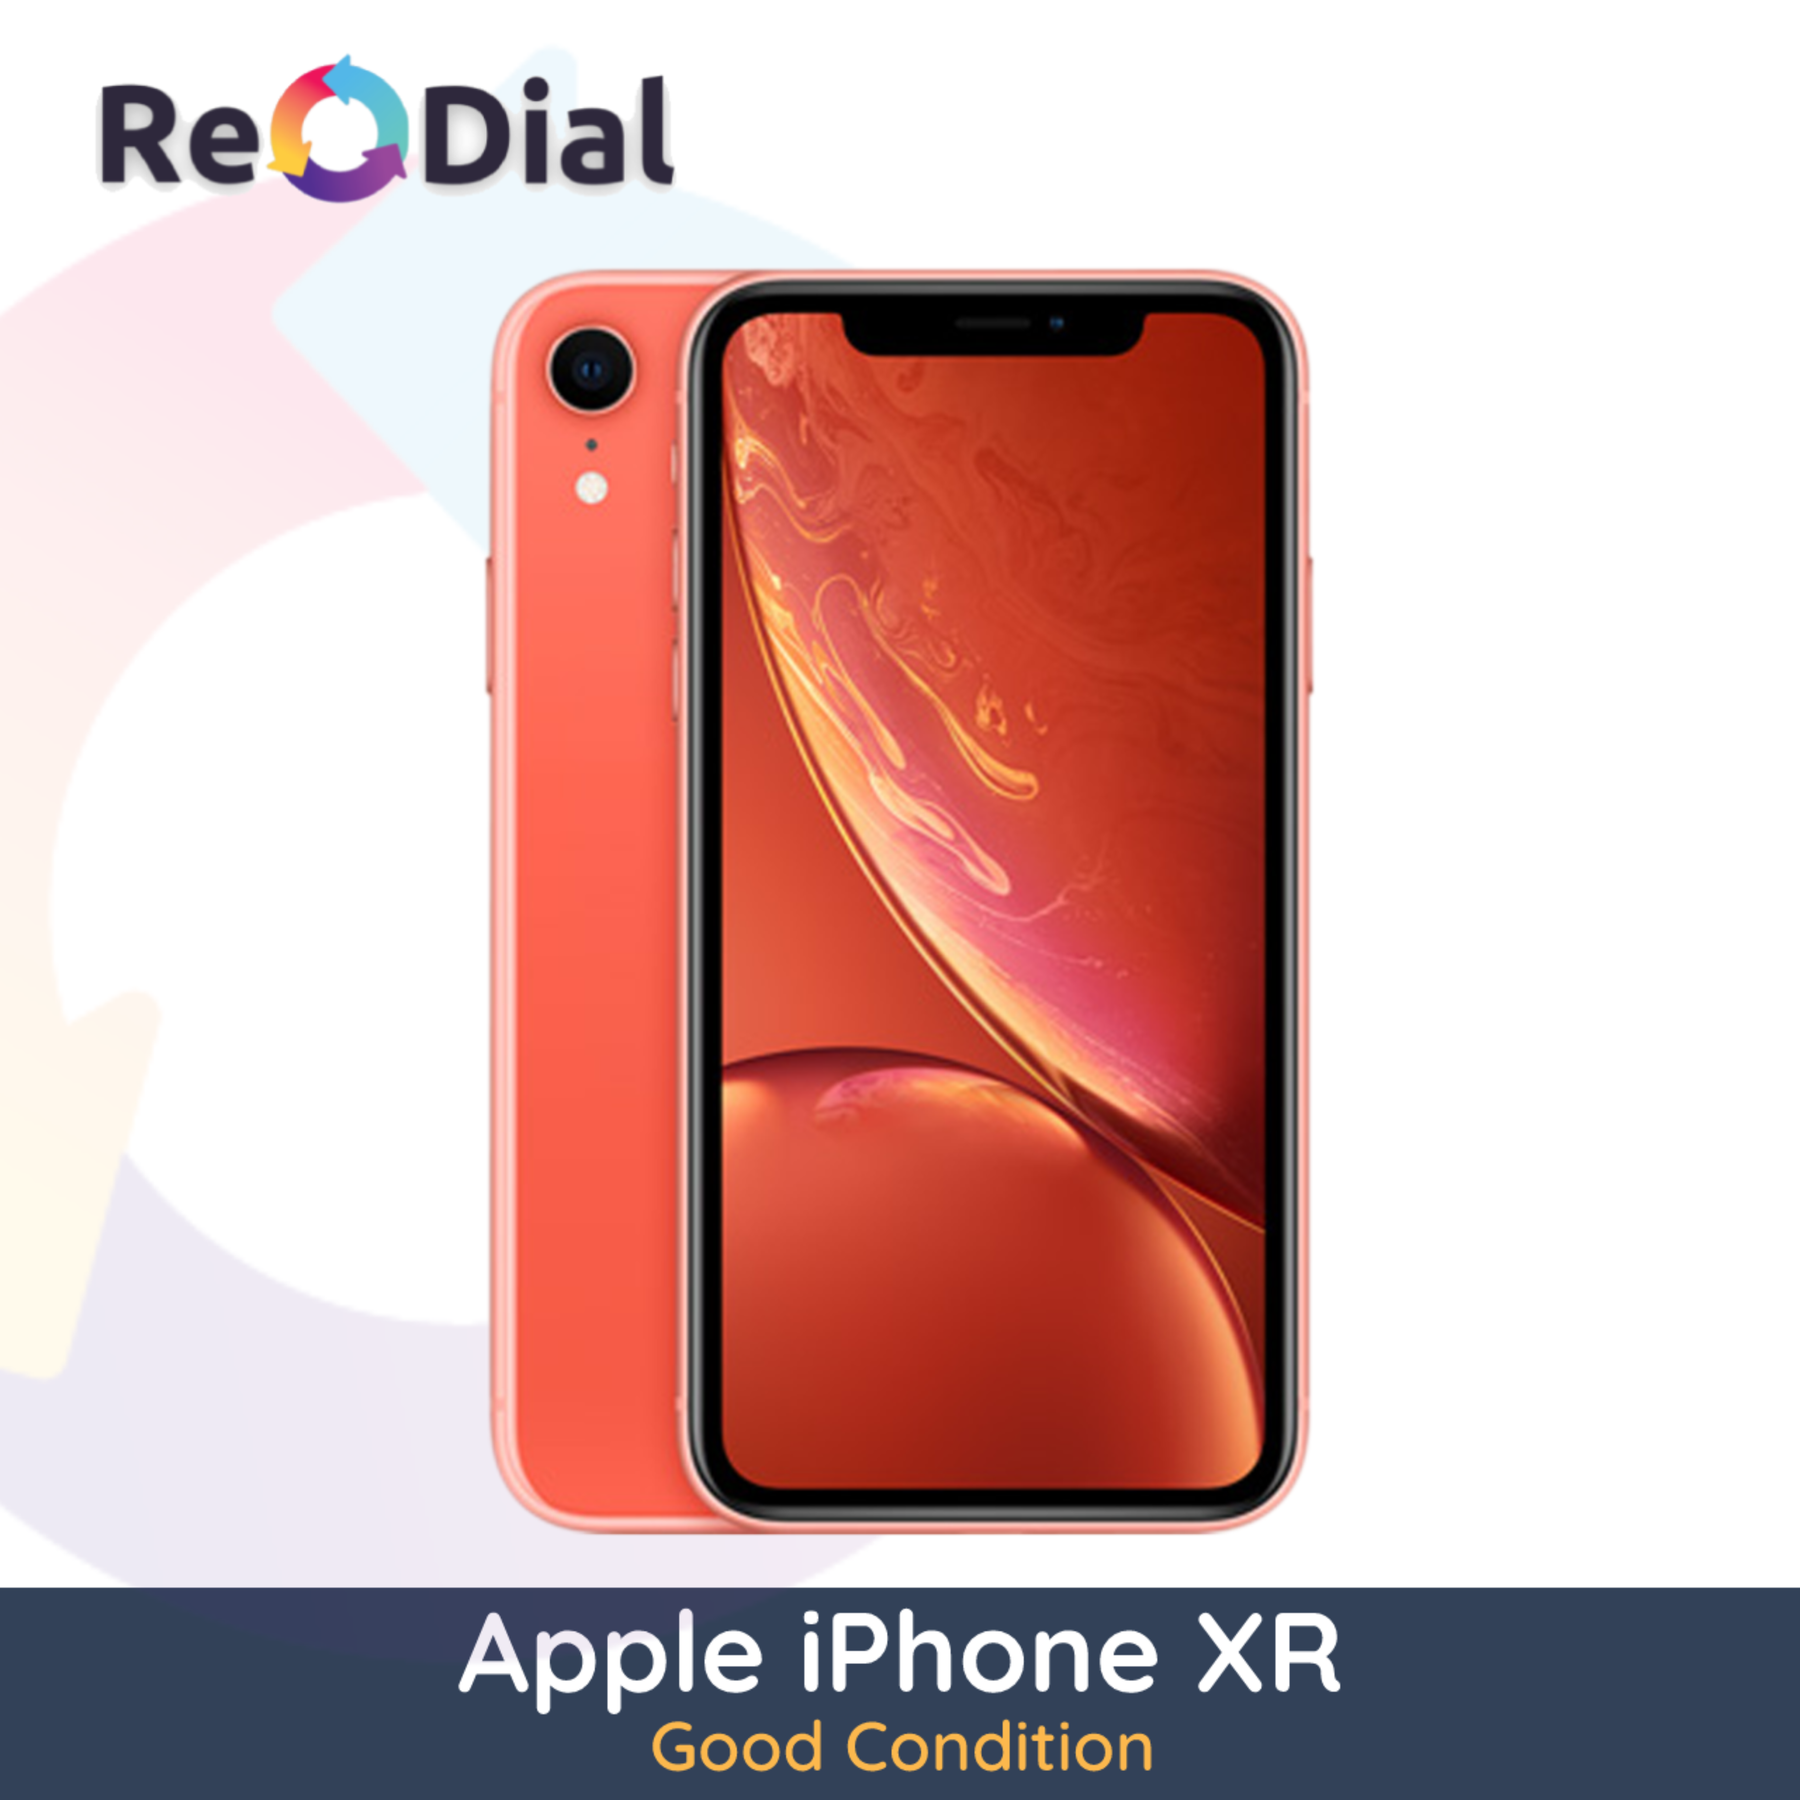 Apple iPhone XR - Good Condition